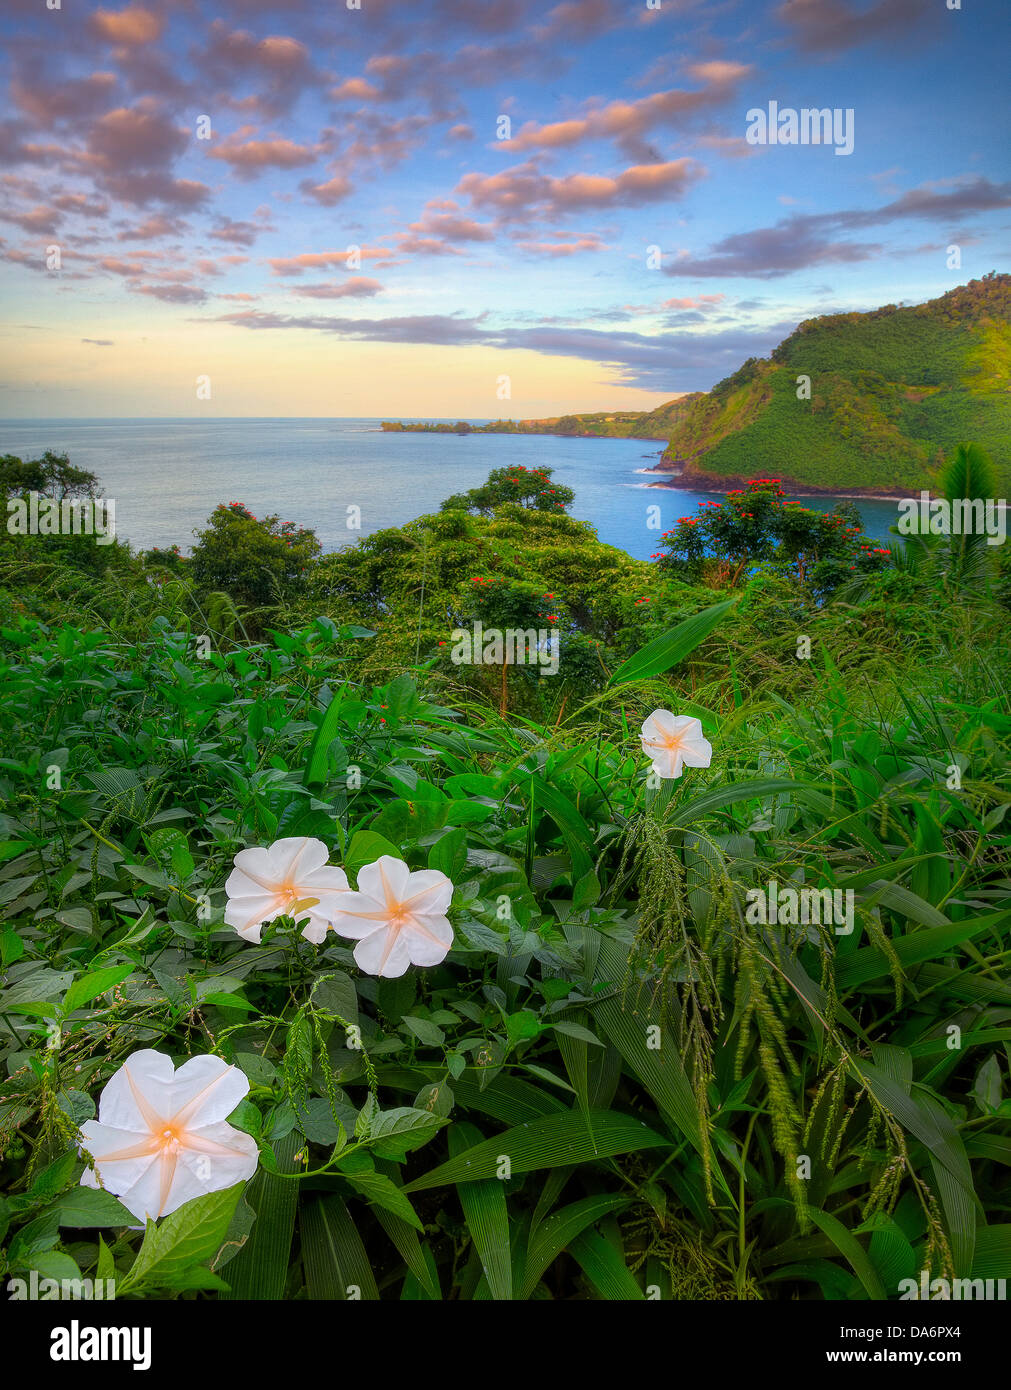 USA, United States, America, Hawaii, Maui, Pacific, Ocean, Flower, Bloom, Sunset, Bay, Inlet Stock Photo